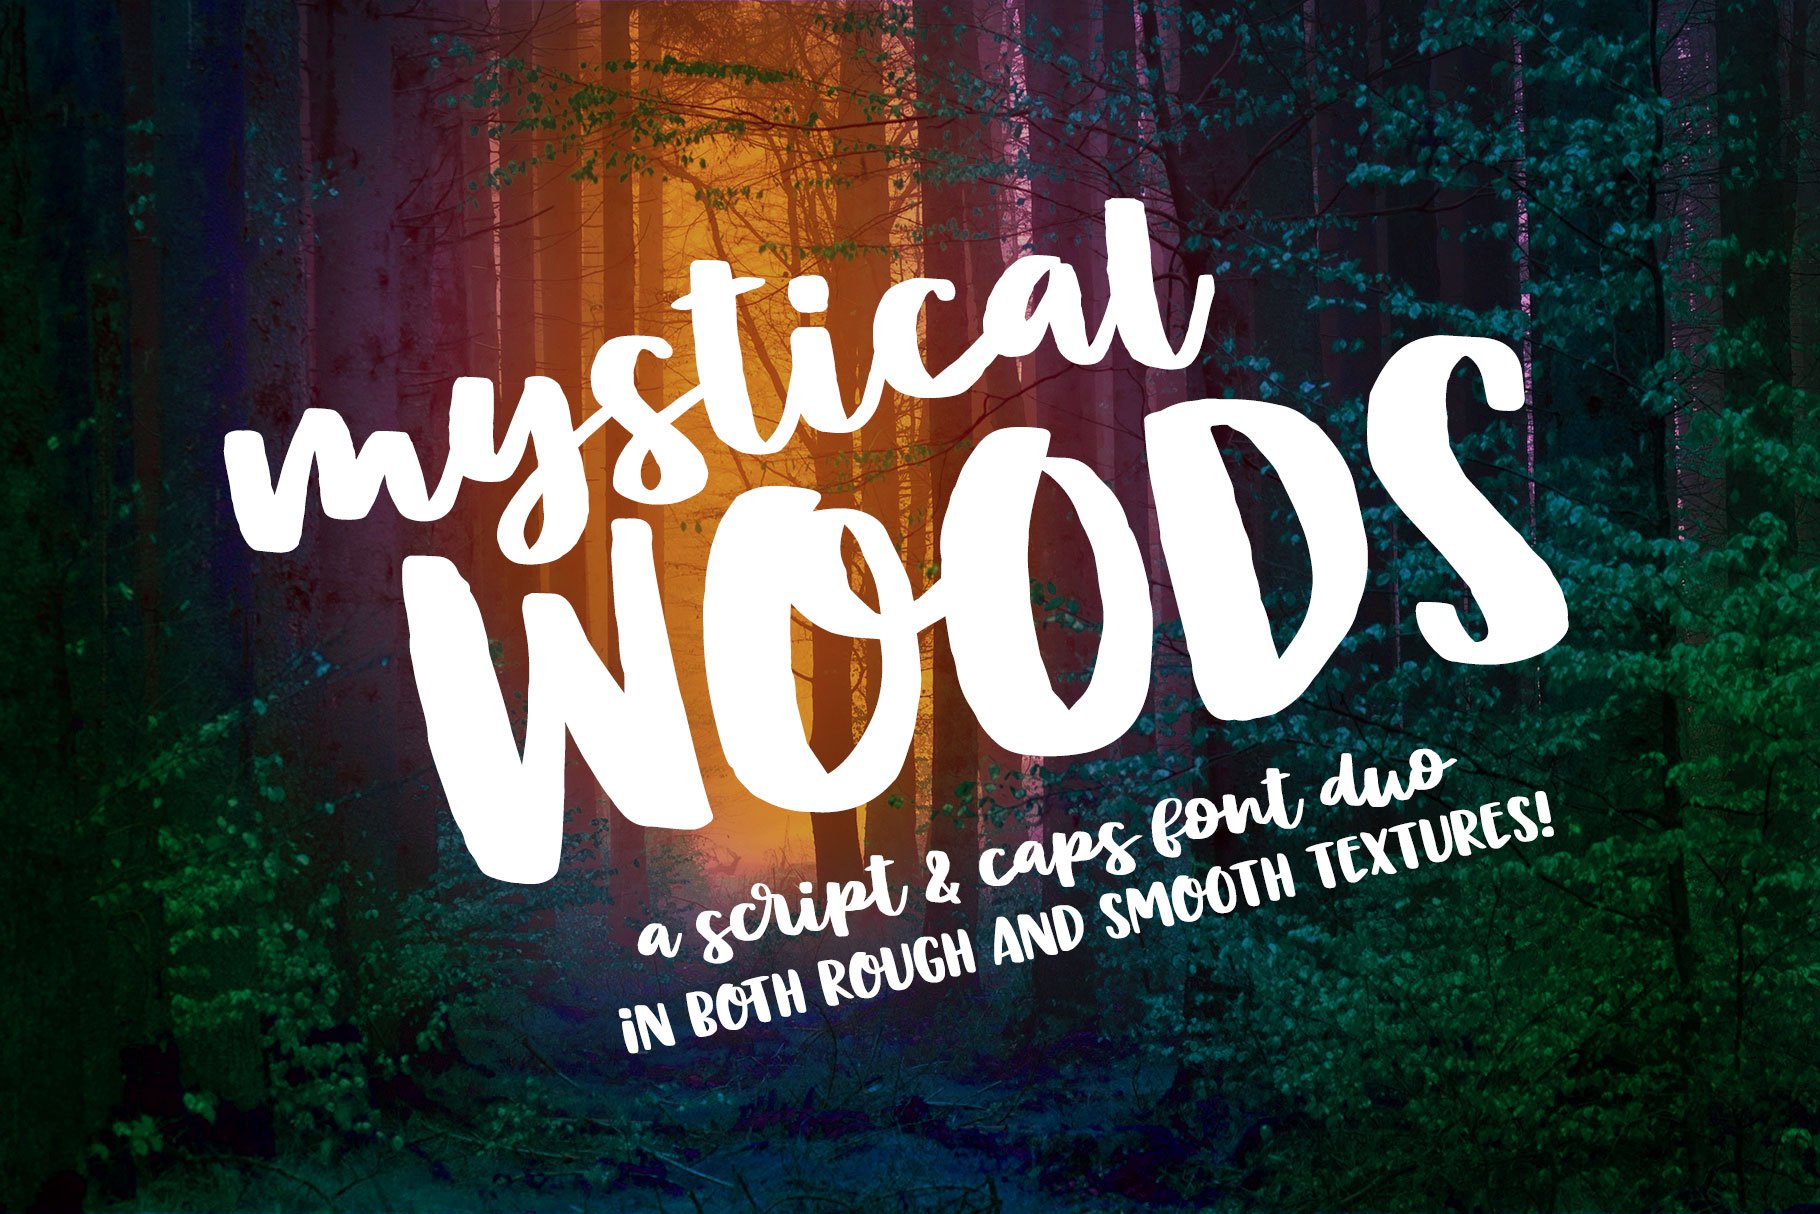 Mystical Woods: script and caps duo cover image.